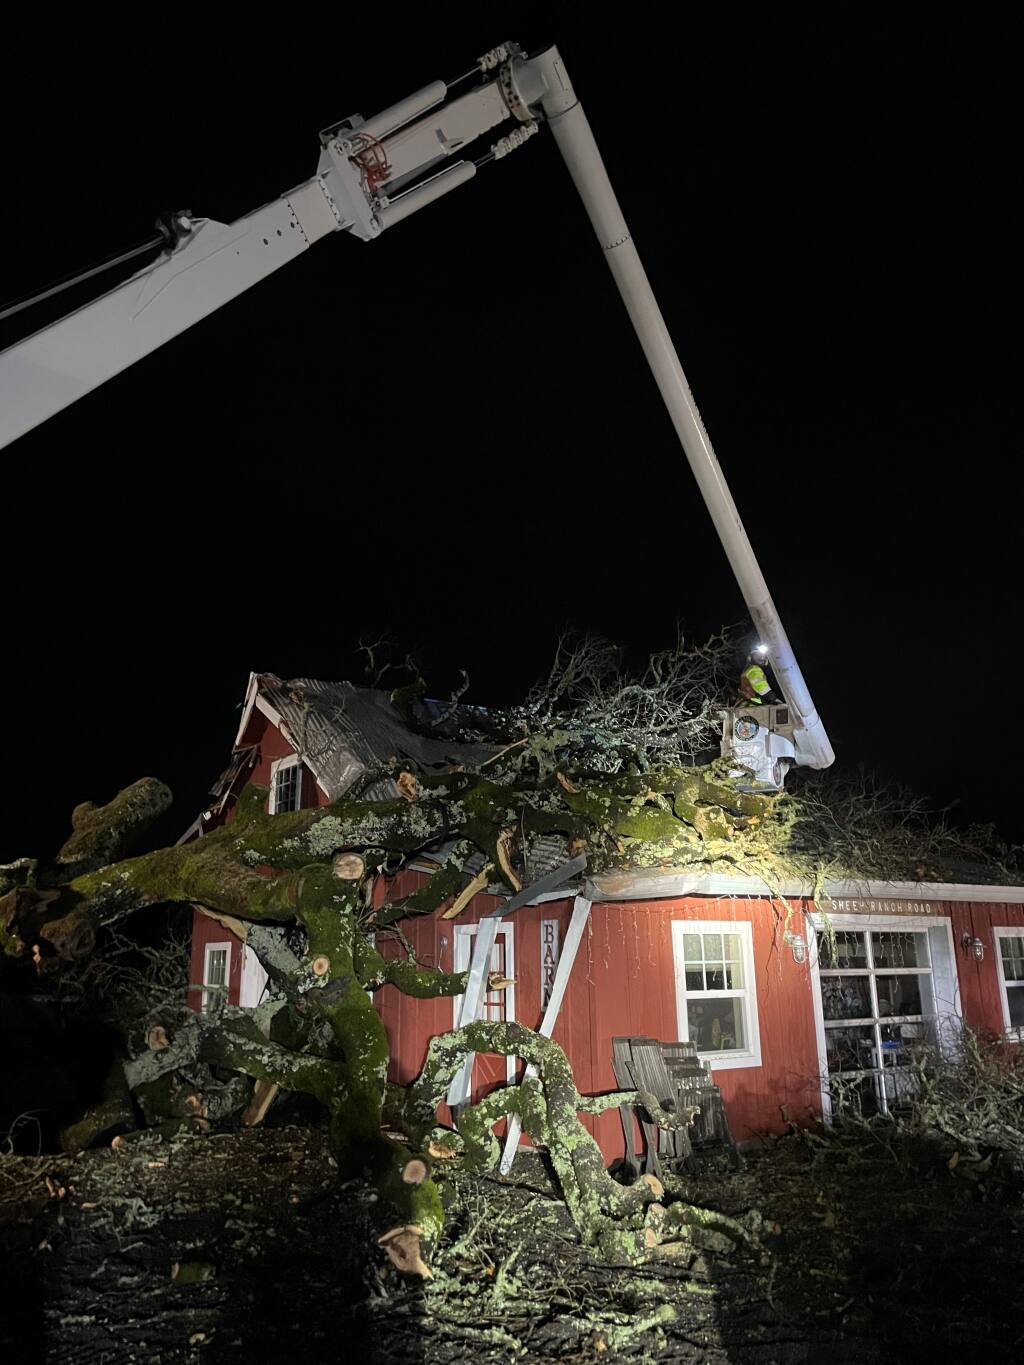 Fine Tree Care of Sebastopol responds to a call to clear fallen tree branches off the roof of a home on Joy Road in Occidental on Friday, Jan. 14, 2023. (Jeff Rebischung / Fine Tree Care photo)